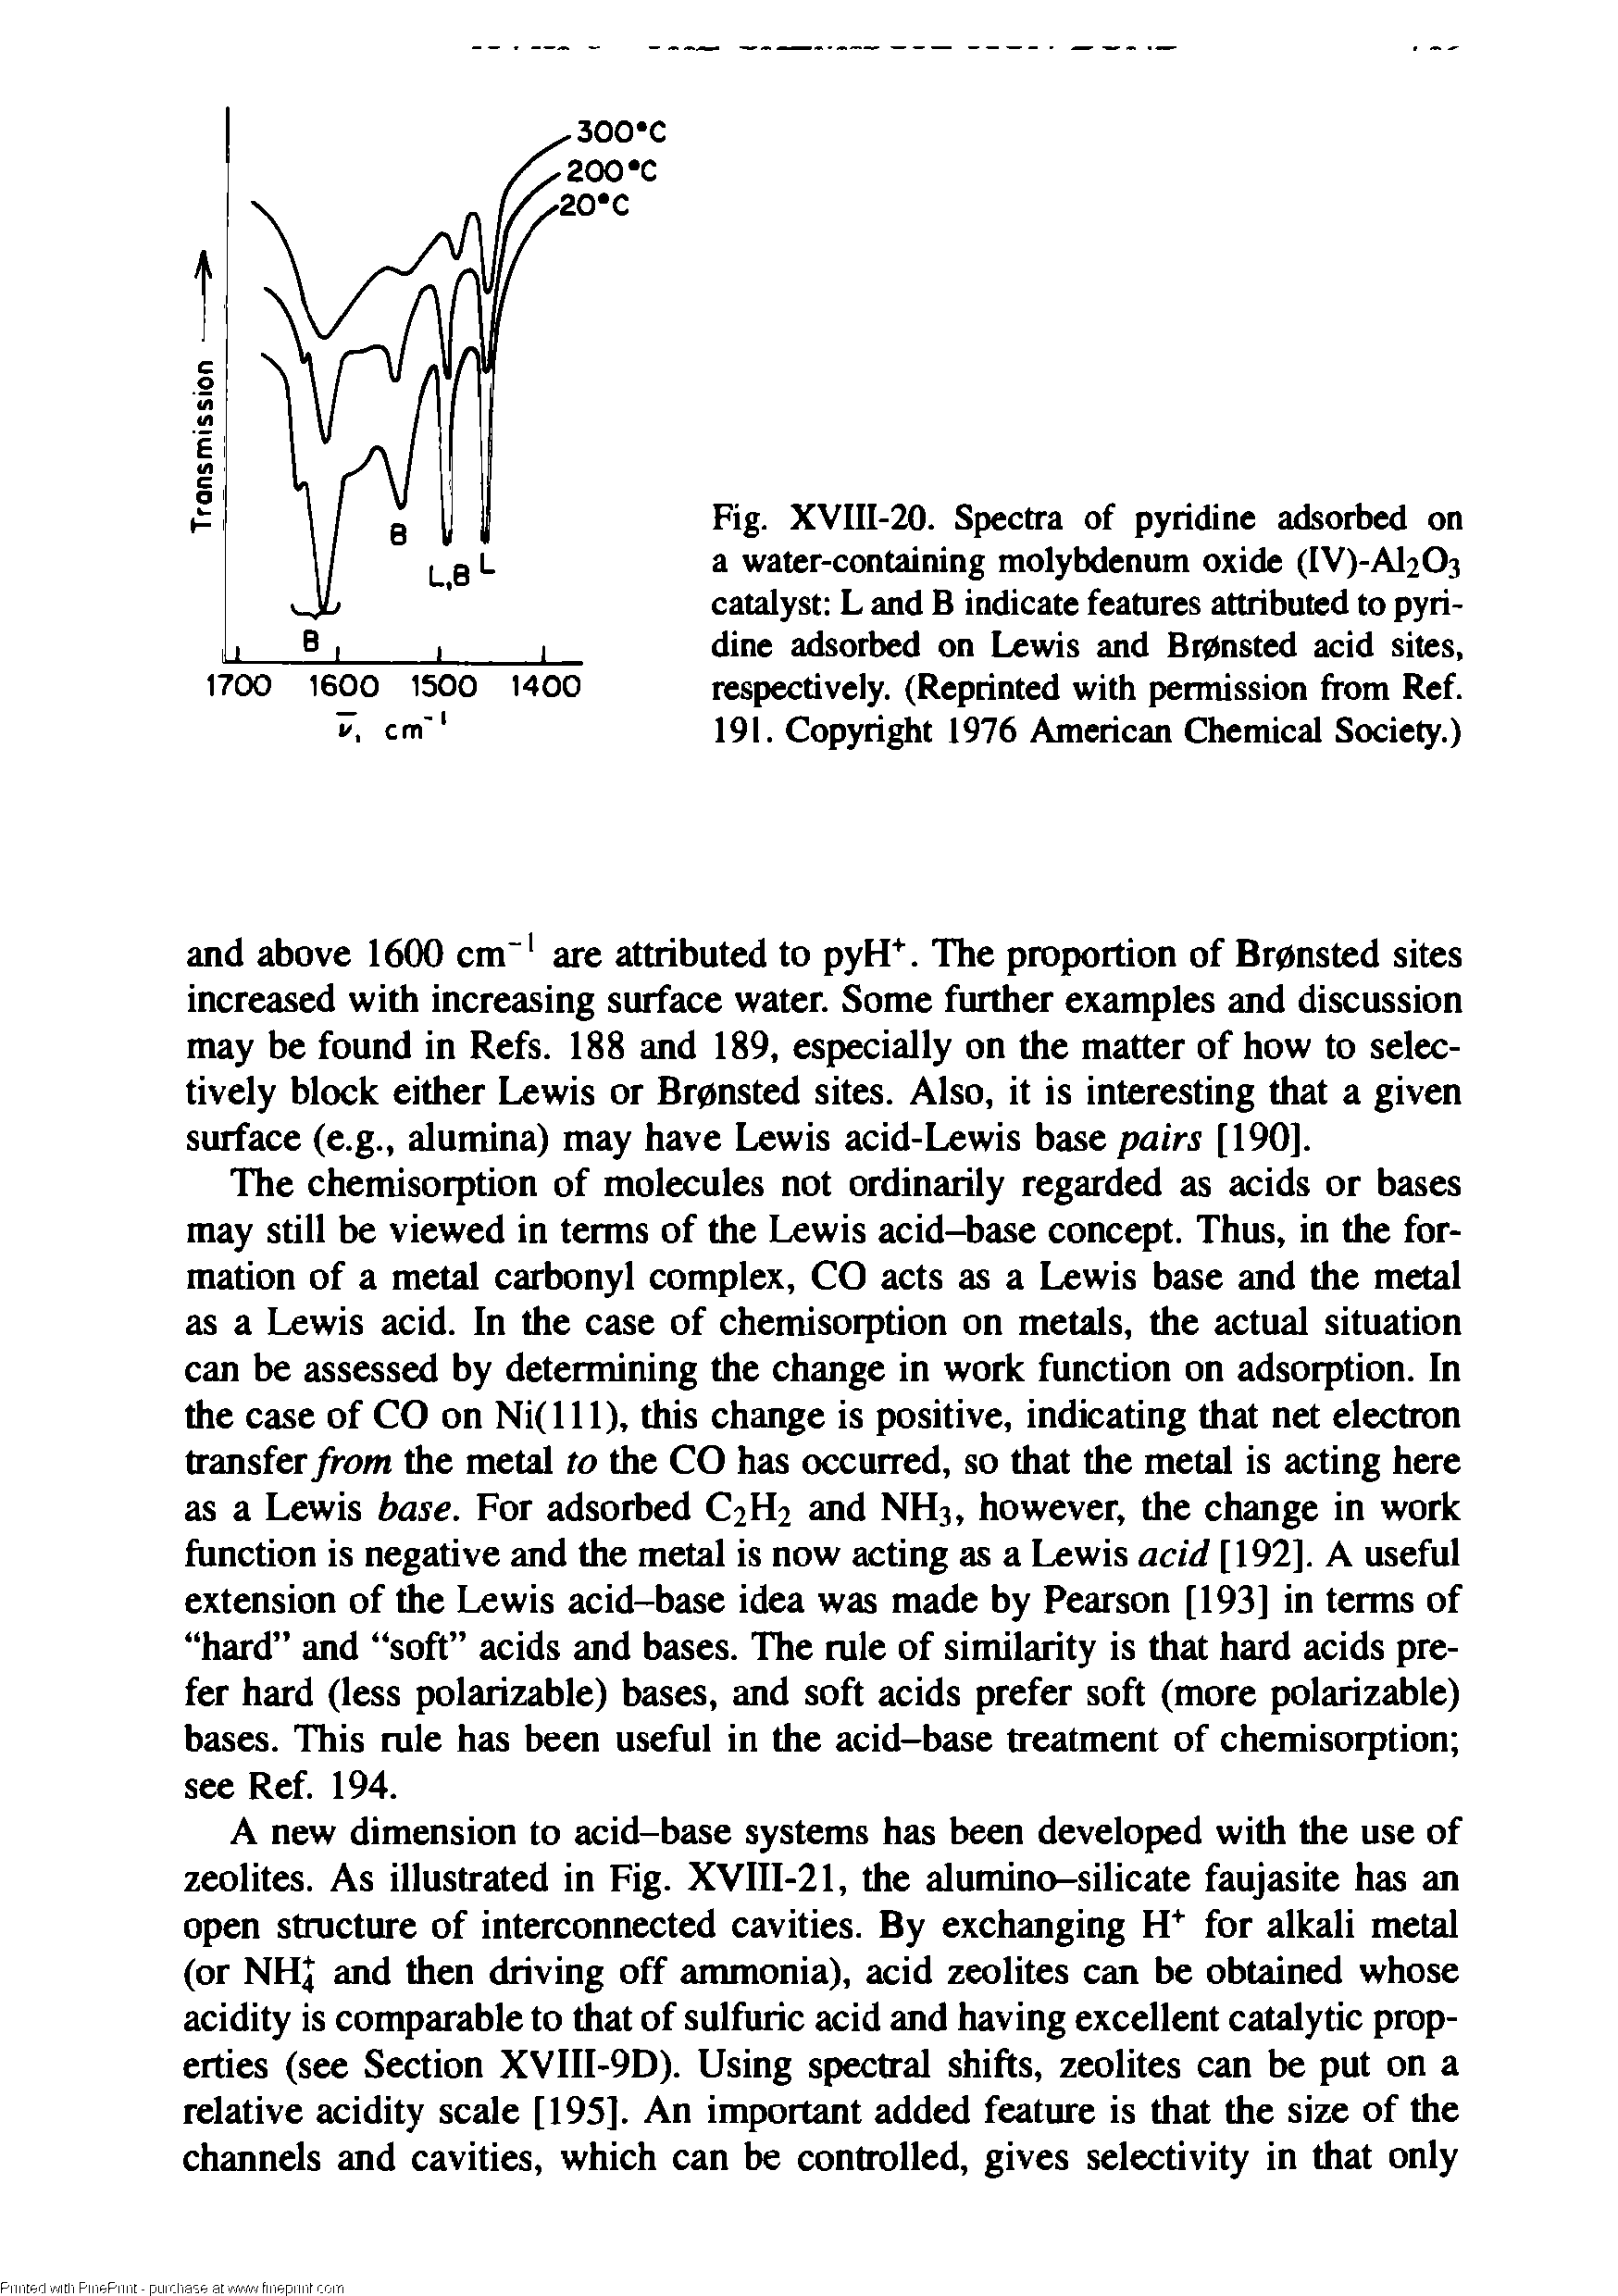 Fig. XVIII-20. Spectra of pyridine adsorbed on a water-containing molybdenum oxide (IV)-Al203 catalyst L and B indicate features attributed to pyridine adsorbed on Lewis and Brpnsted acid sites, respectively. (Reprinted with permission from Ref. 191. Copyright 1976 American Chemical Society.)...